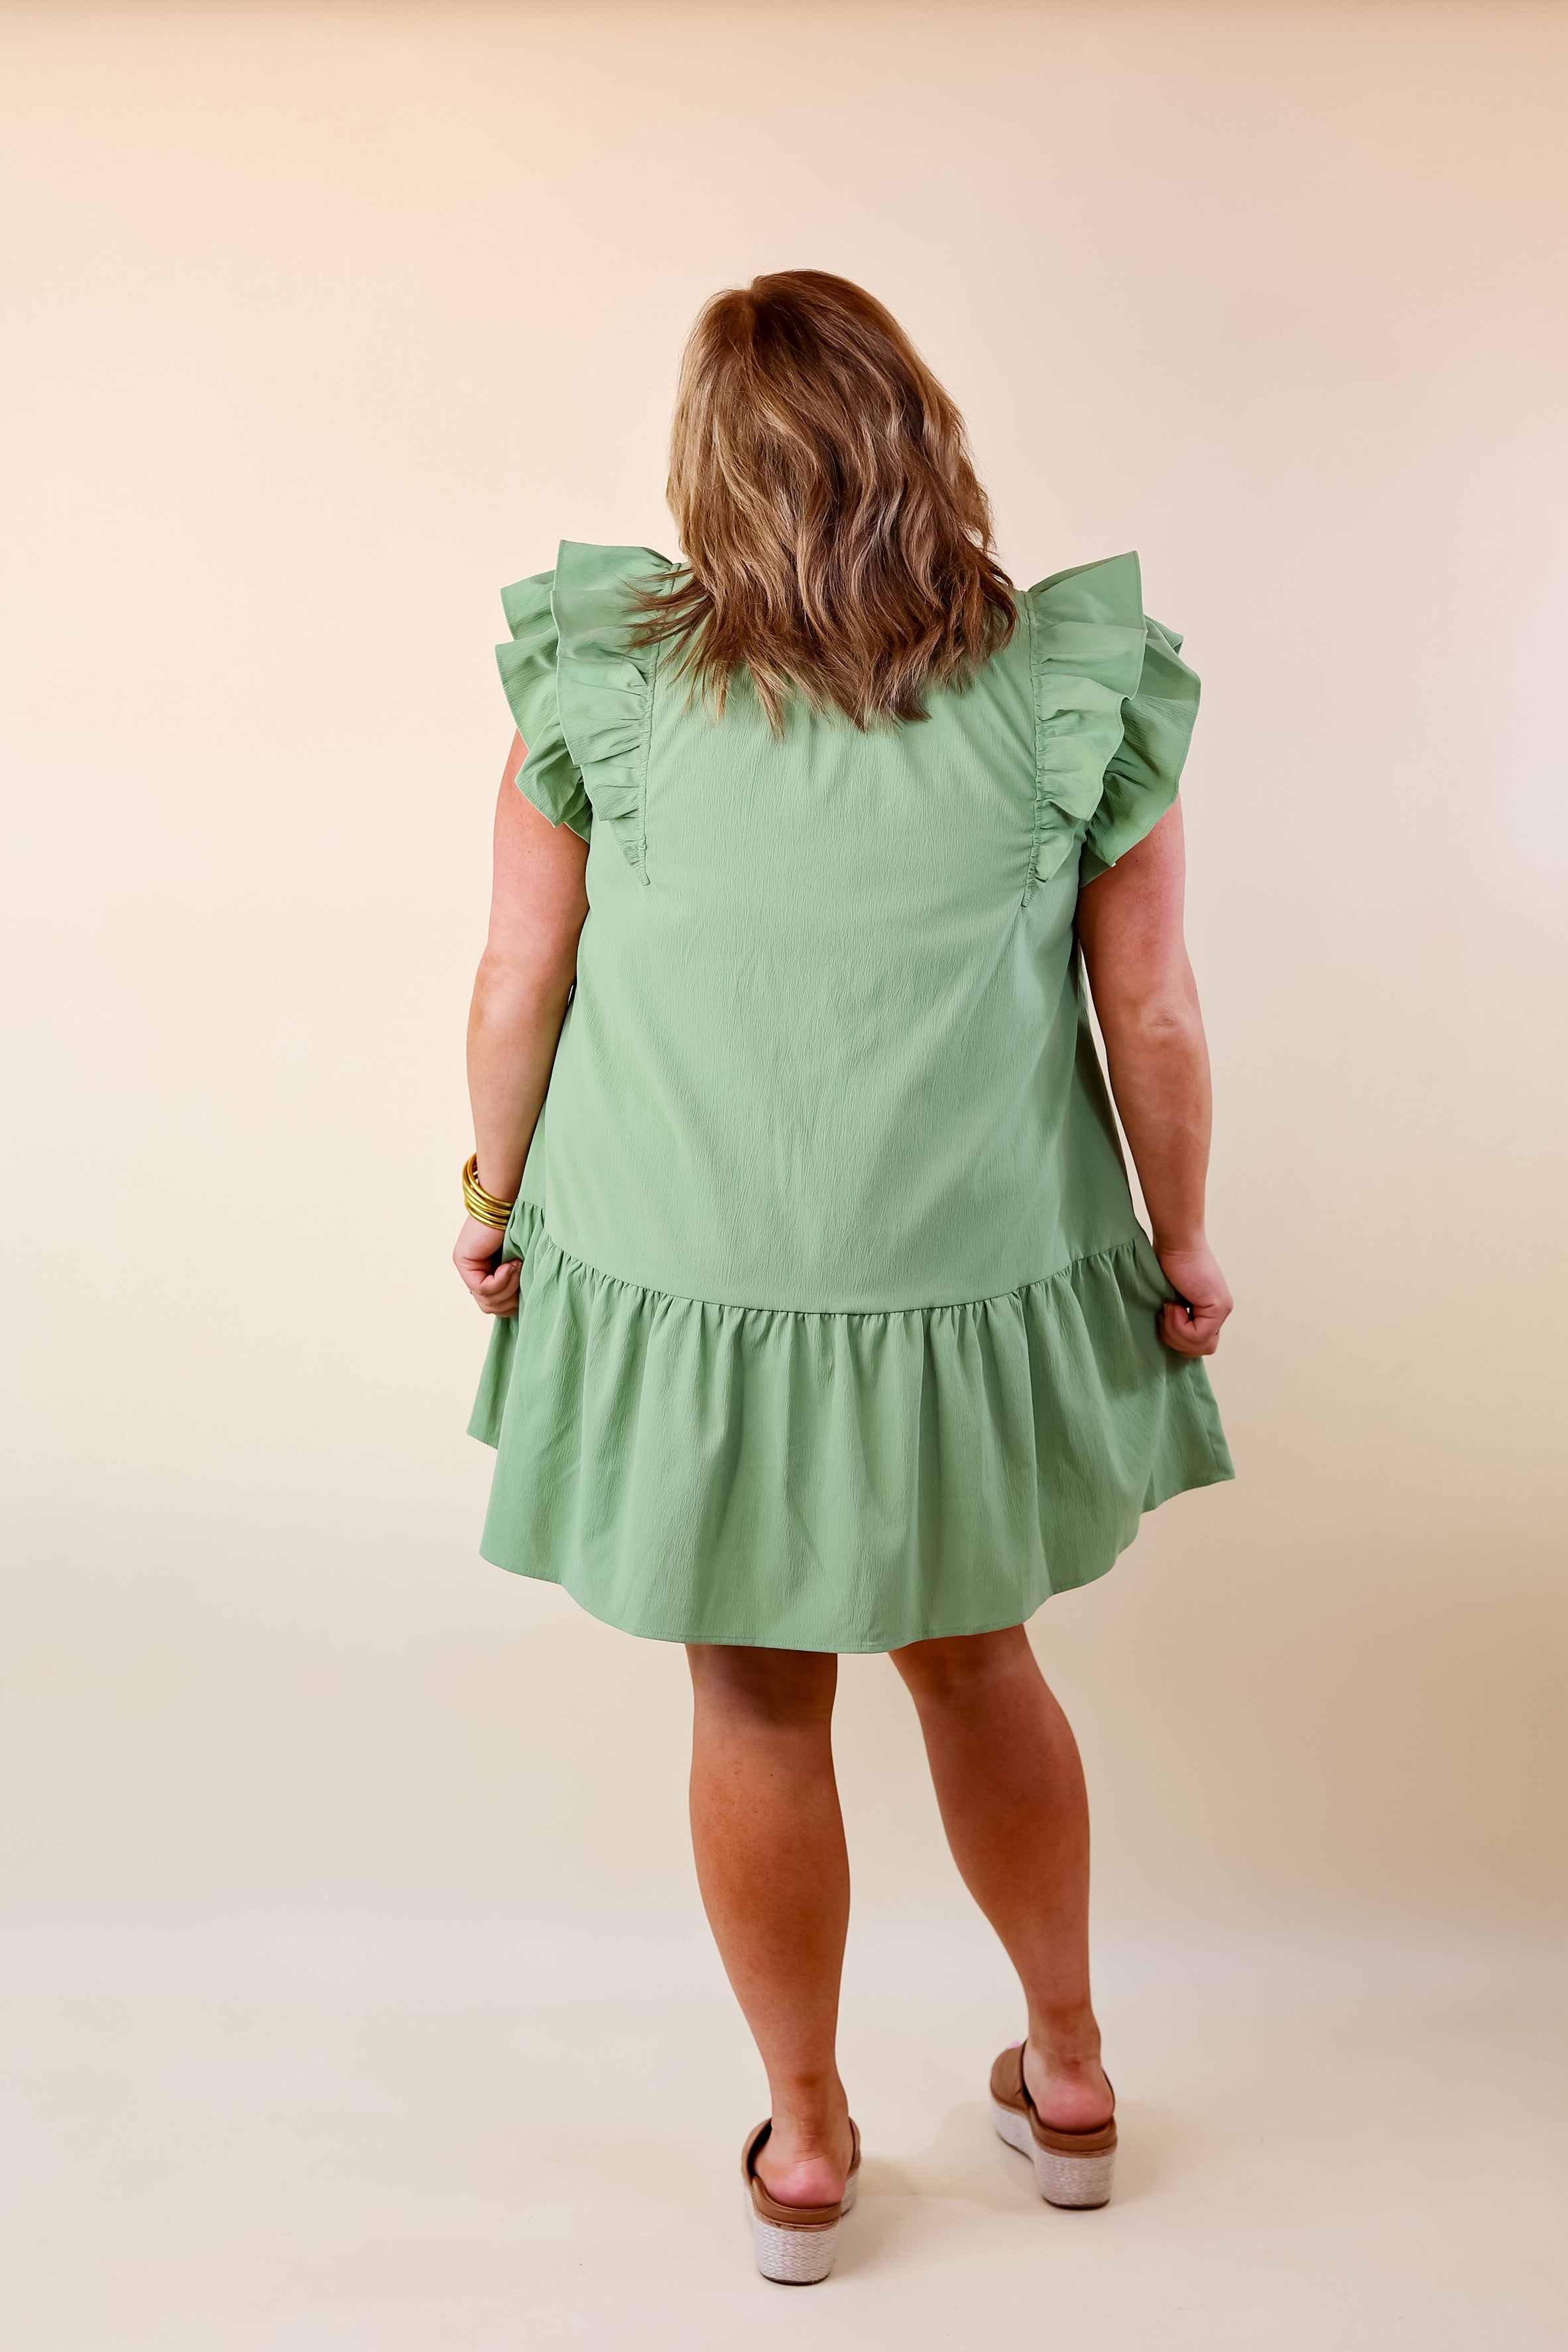 Powerful Love Ruffle Cap Sleeve Dress with Keyhole and Tie Neckline in Sage Green - Giddy Up Glamour Boutique